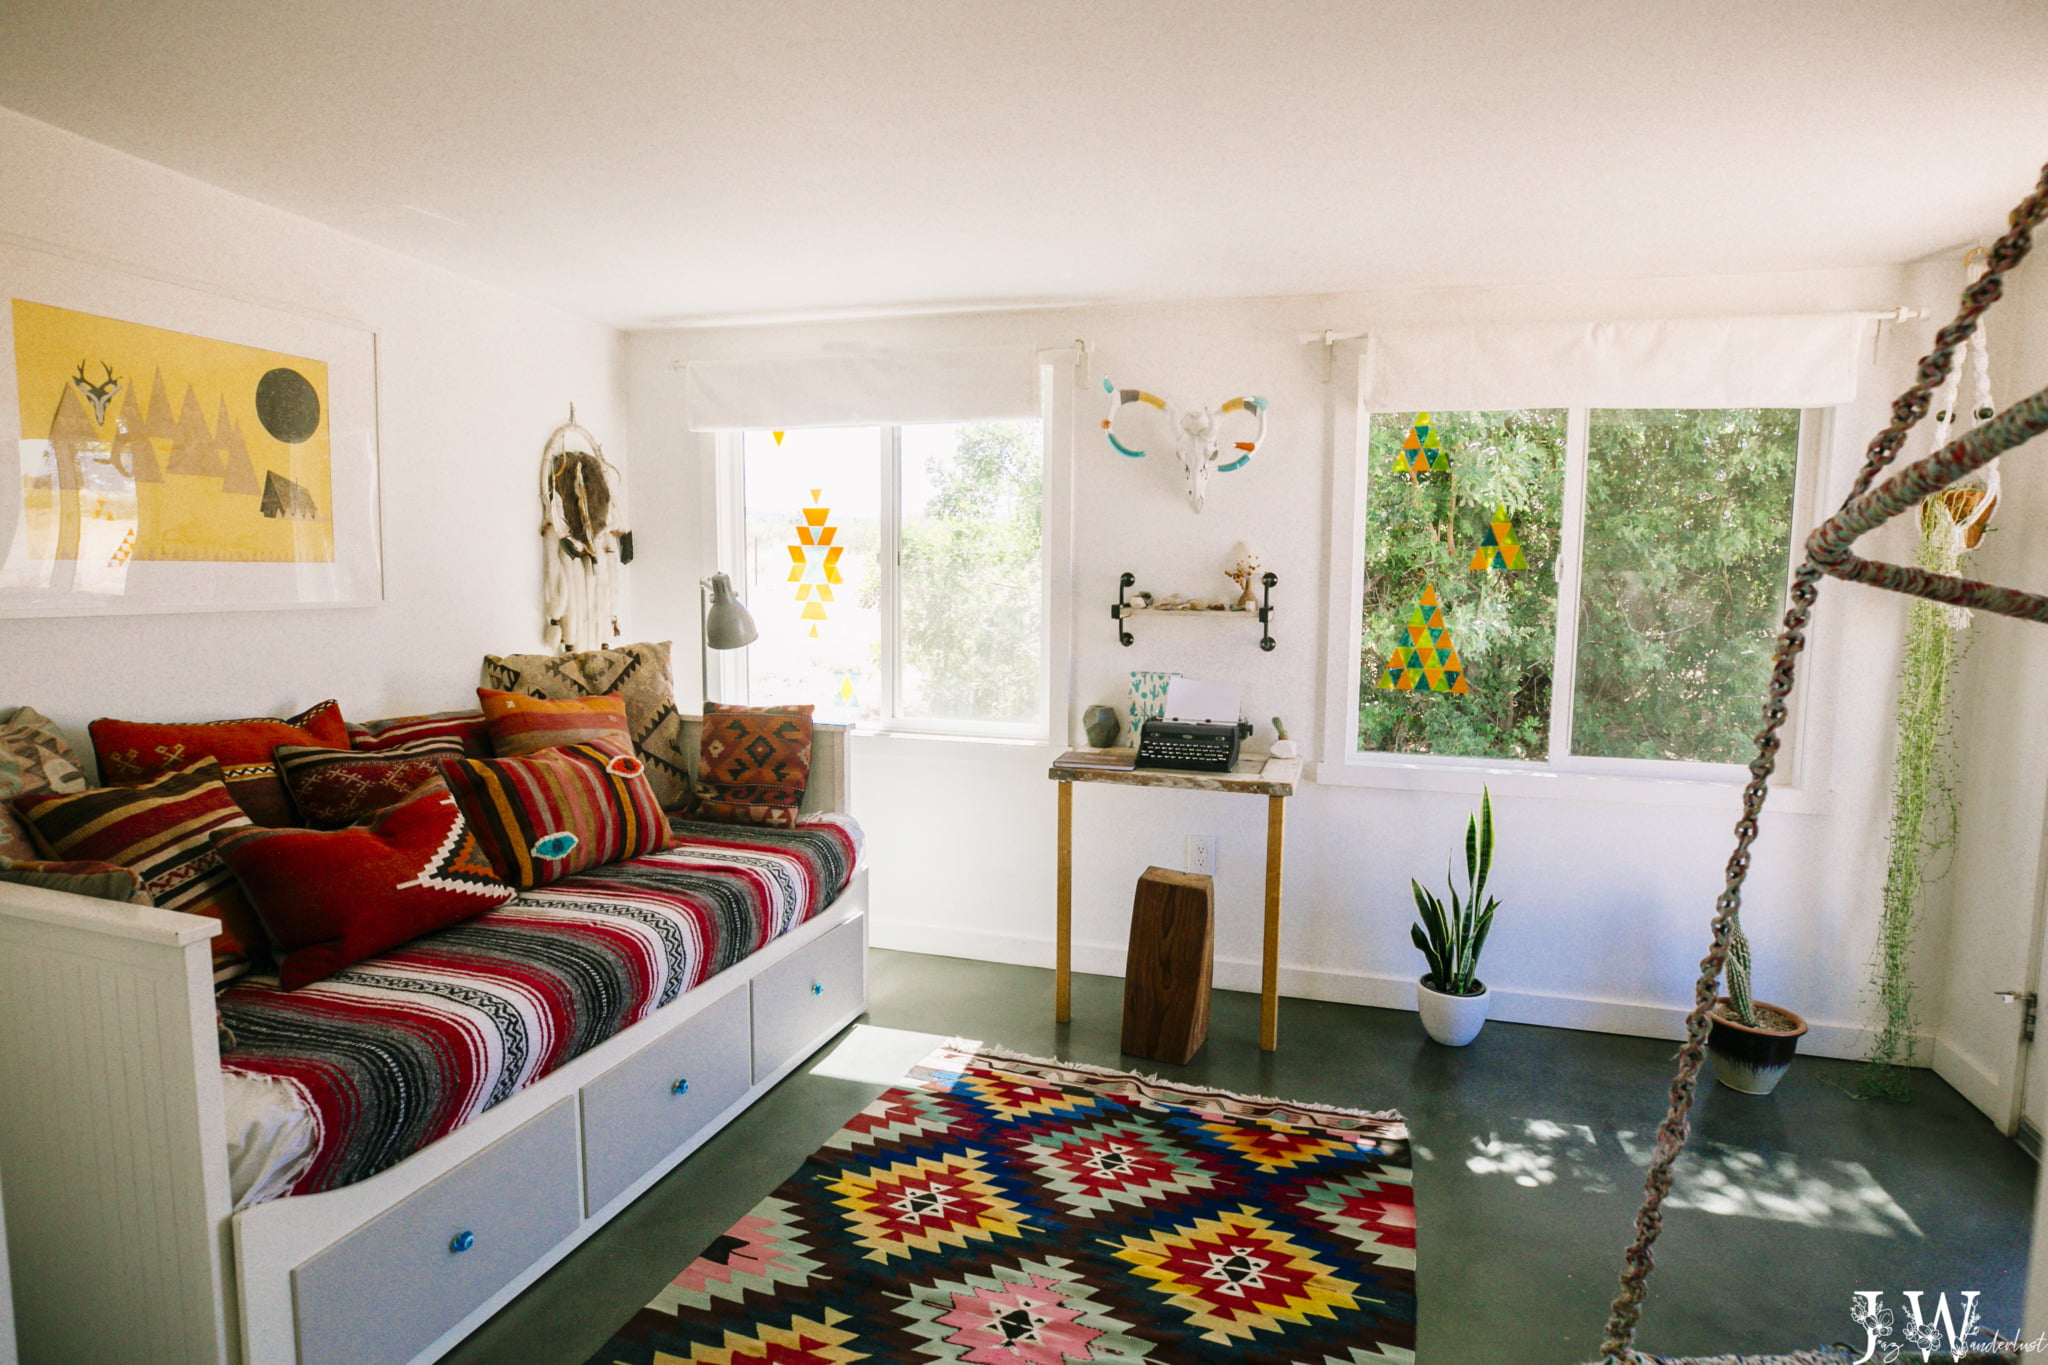 Airbnb in Joshua Tree National Park. Photography by Jaz Wanderlust.